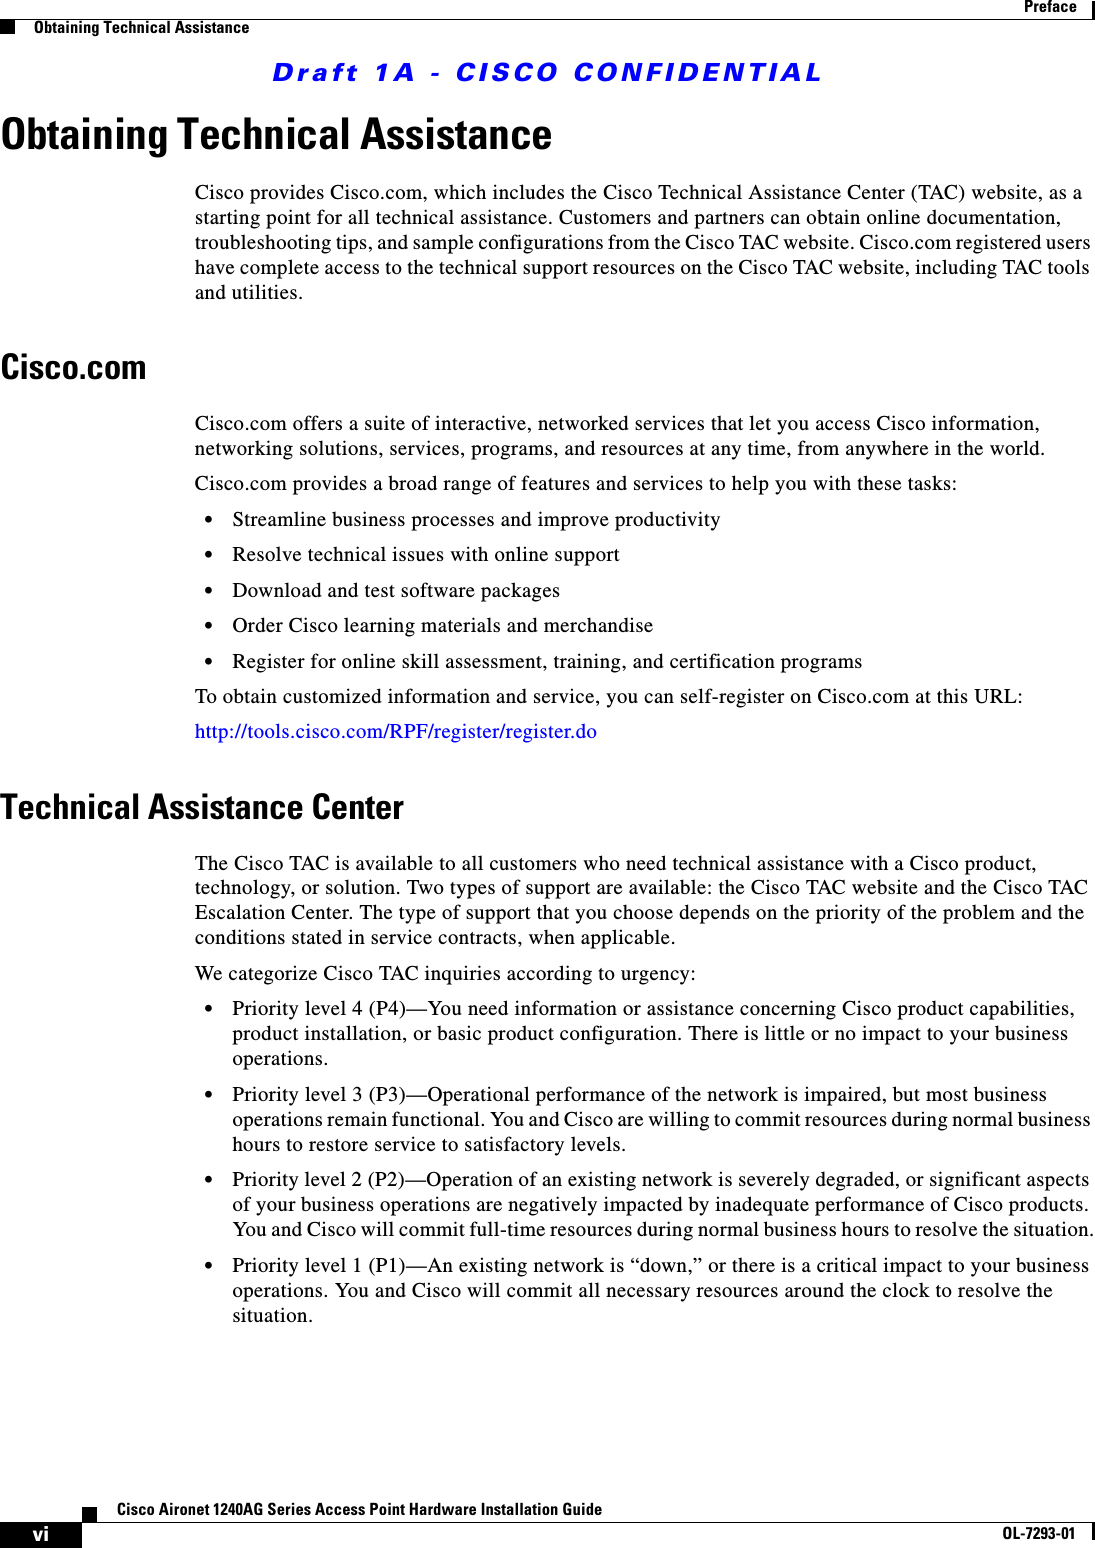 Draft 1A - CISCO CONFIDENTIALviCisco Aironet 1240AG Series Access Point Hardware Installation GuideOL-7293-01PrefaceObtaining Technical AssistanceObtaining Technical AssistanceCisco provides Cisco.com, which includes the Cisco Technical Assistance Center (TAC) website, as a starting point for all technical assistance. Customers and partners can obtain online documentation, troubleshooting tips, and sample configurations from the Cisco TAC website. Cisco.com registered users have complete access to the technical support resources on the Cisco TAC website, including TAC tools and utilities. Cisco.comCisco.com offers a suite of interactive, networked services that let you access Cisco information, networking solutions, services, programs, and resources at any time, from anywhere in the world. Cisco.com provides a broad range of features and services to help you with these tasks:•Streamline business processes and improve productivity •Resolve technical issues with online support•Download and test software packages•Order Cisco learning materials and merchandise•Register for online skill assessment, training, and certification programsTo obtain customized information and service, you can self-register on Cisco.com at this URL:http://tools.cisco.com/RPF/register/register.doTechnical Assistance CenterThe Cisco TAC is available to all customers who need technical assistance with a Cisco product, technology, or solution. Two types of support are available: the Cisco TAC website and the Cisco TAC Escalation Center. The type of support that you choose depends on the priority of the problem and the conditions stated in service contracts, when applicable.We categorize Cisco TAC inquiries according to urgency:•Priority level 4 (P4)—You need information or assistance concerning Cisco product capabilities, product installation, or basic product configuration. There is little or no impact to your business operations.•Priority level 3 (P3)—Operational performance of the network is impaired, but most business operations remain functional. You and Cisco are willing to commit resources during normal business hours to restore service to satisfactory levels.•Priority level 2 (P2)—Operation of an existing network is severely degraded, or significant aspects of your business operations are negatively impacted by inadequate performance of Cisco products. You and Cisco will commit full-time resources during normal business hours to resolve the situation.•Priority level 1 (P1)—An existing network is “down,” or there is a critical impact to your business operations. You and Cisco will commit all necessary resources around the clock to resolve the situation.